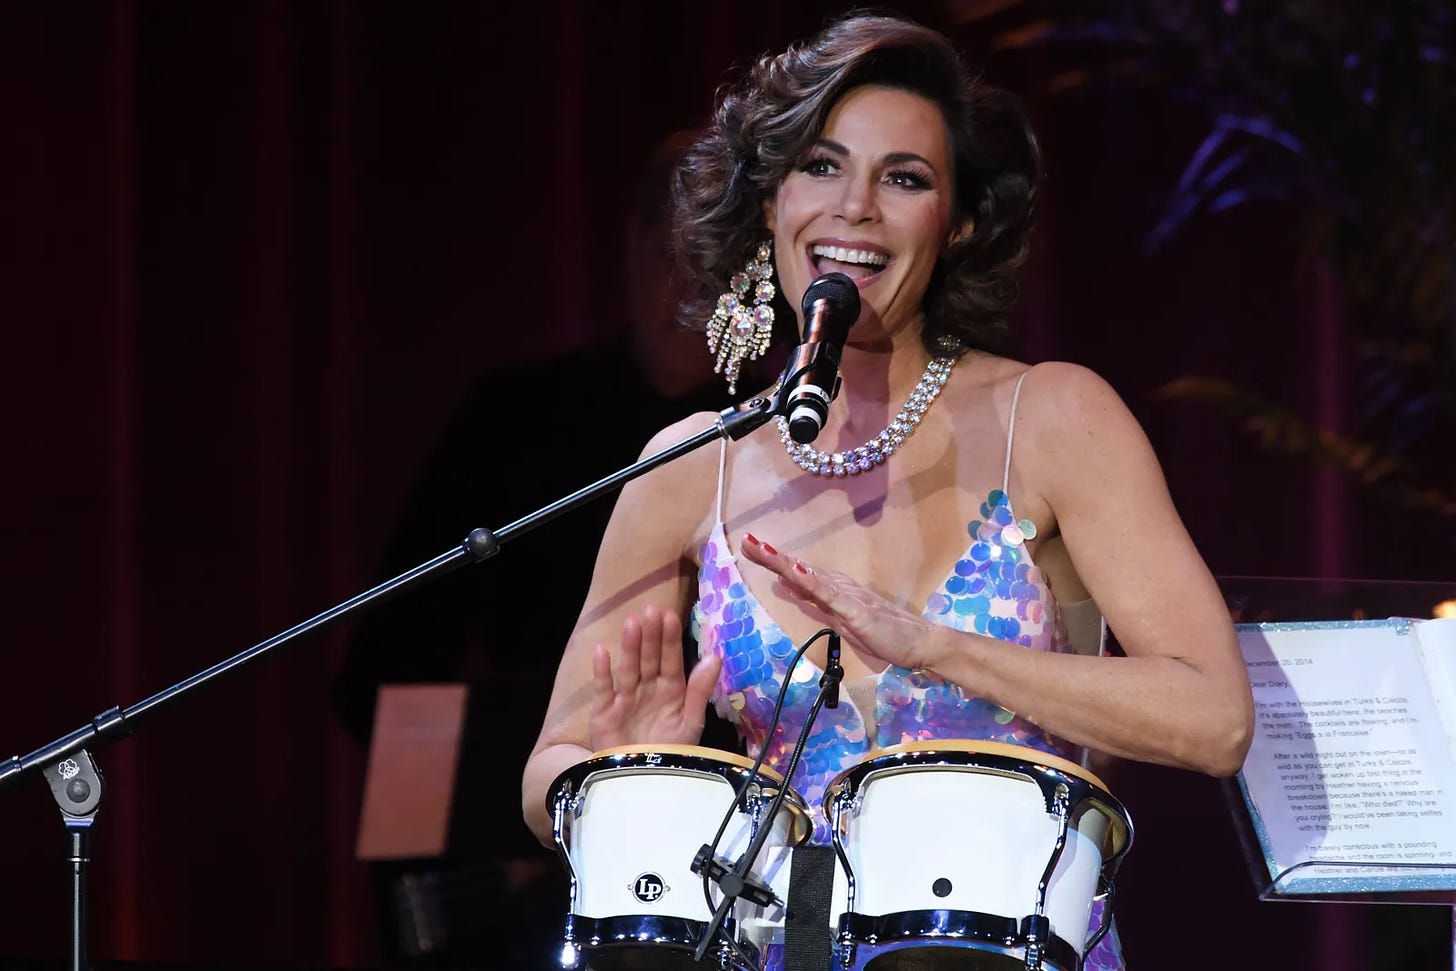 Luann de Lesseps plays the drums and talks into a microphone on stage during her cabaret show